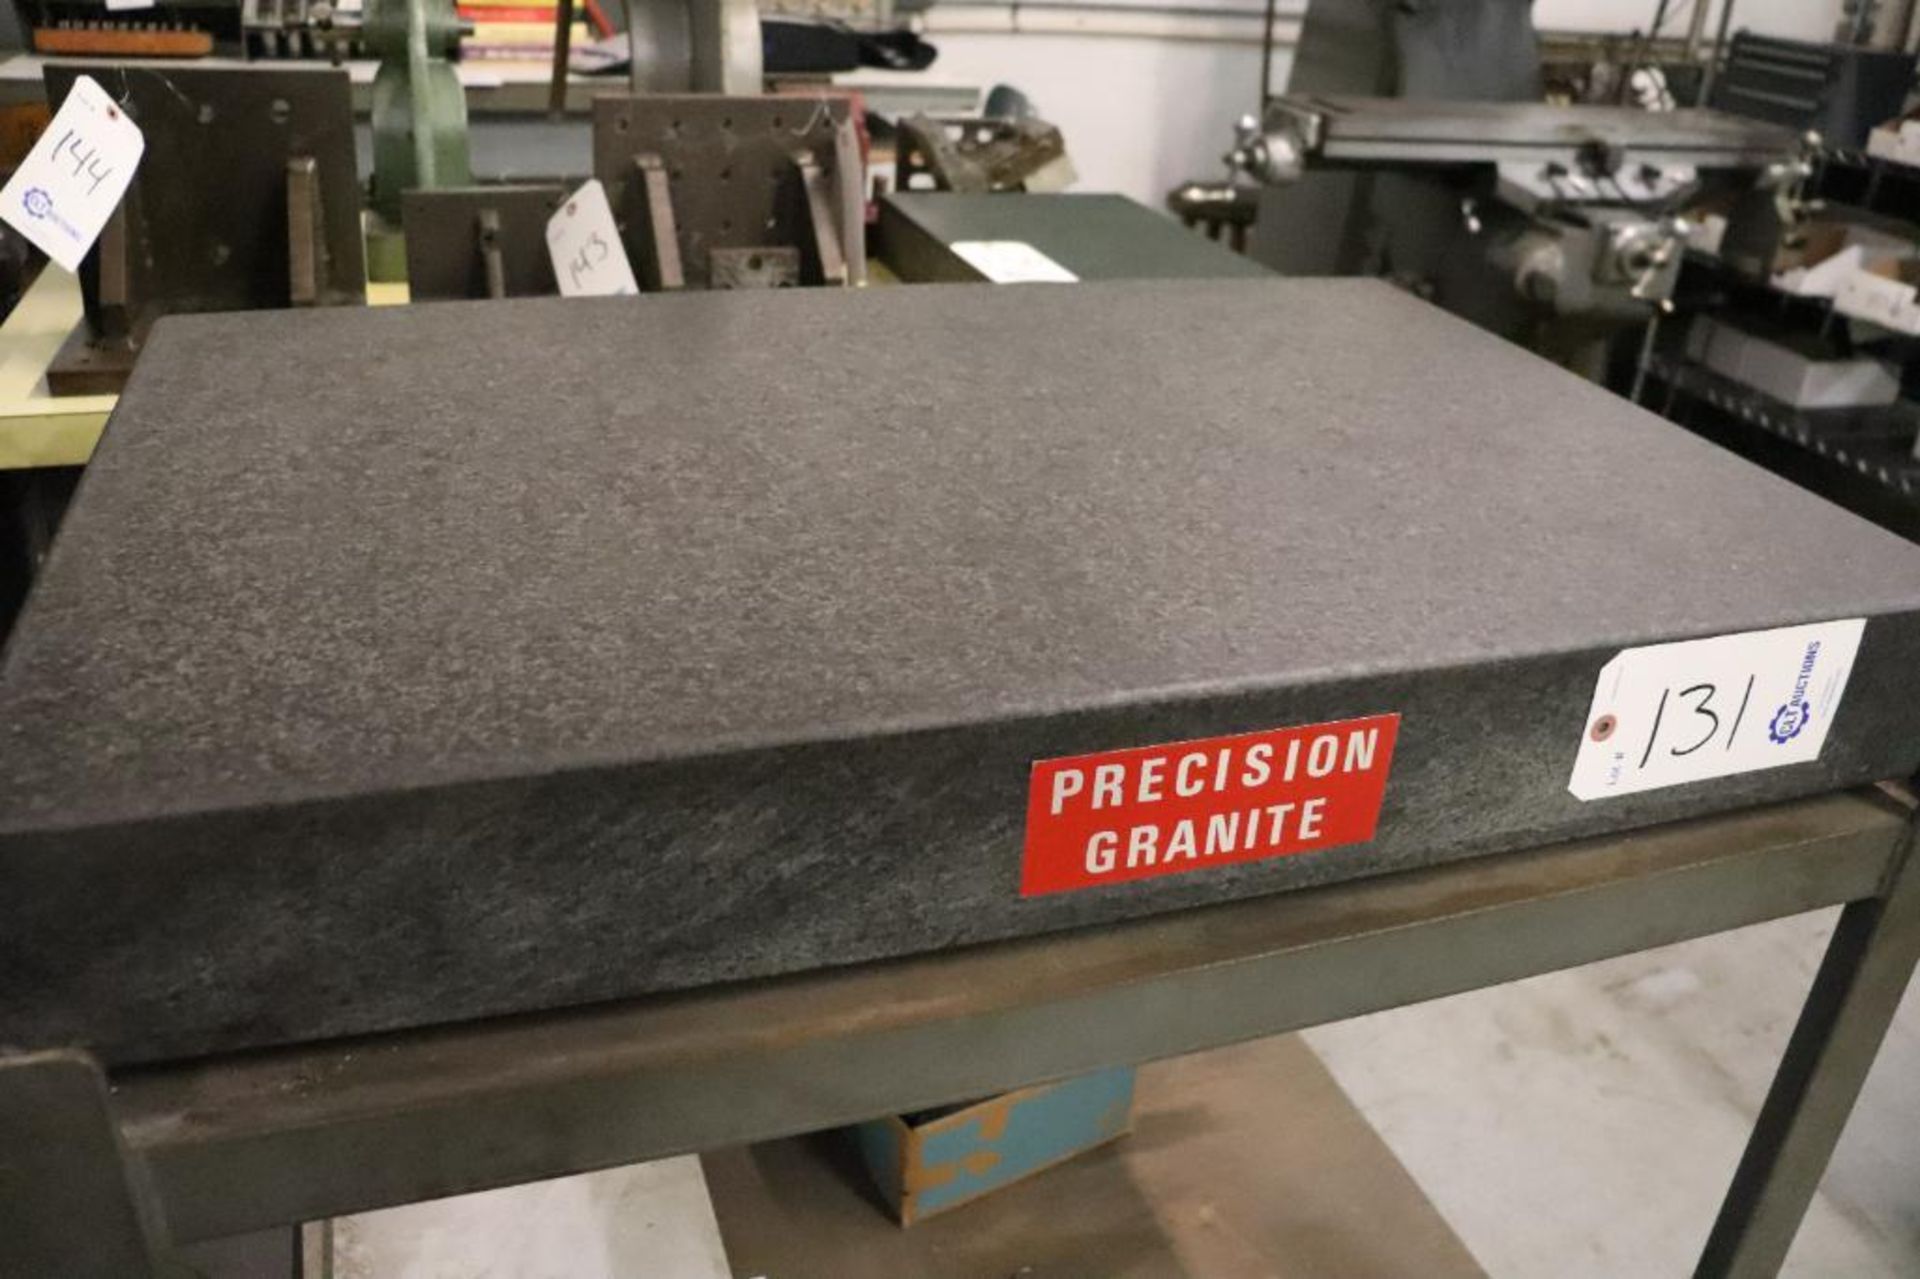 Precision Granite 24" x 36" surface plate - Image 3 of 6